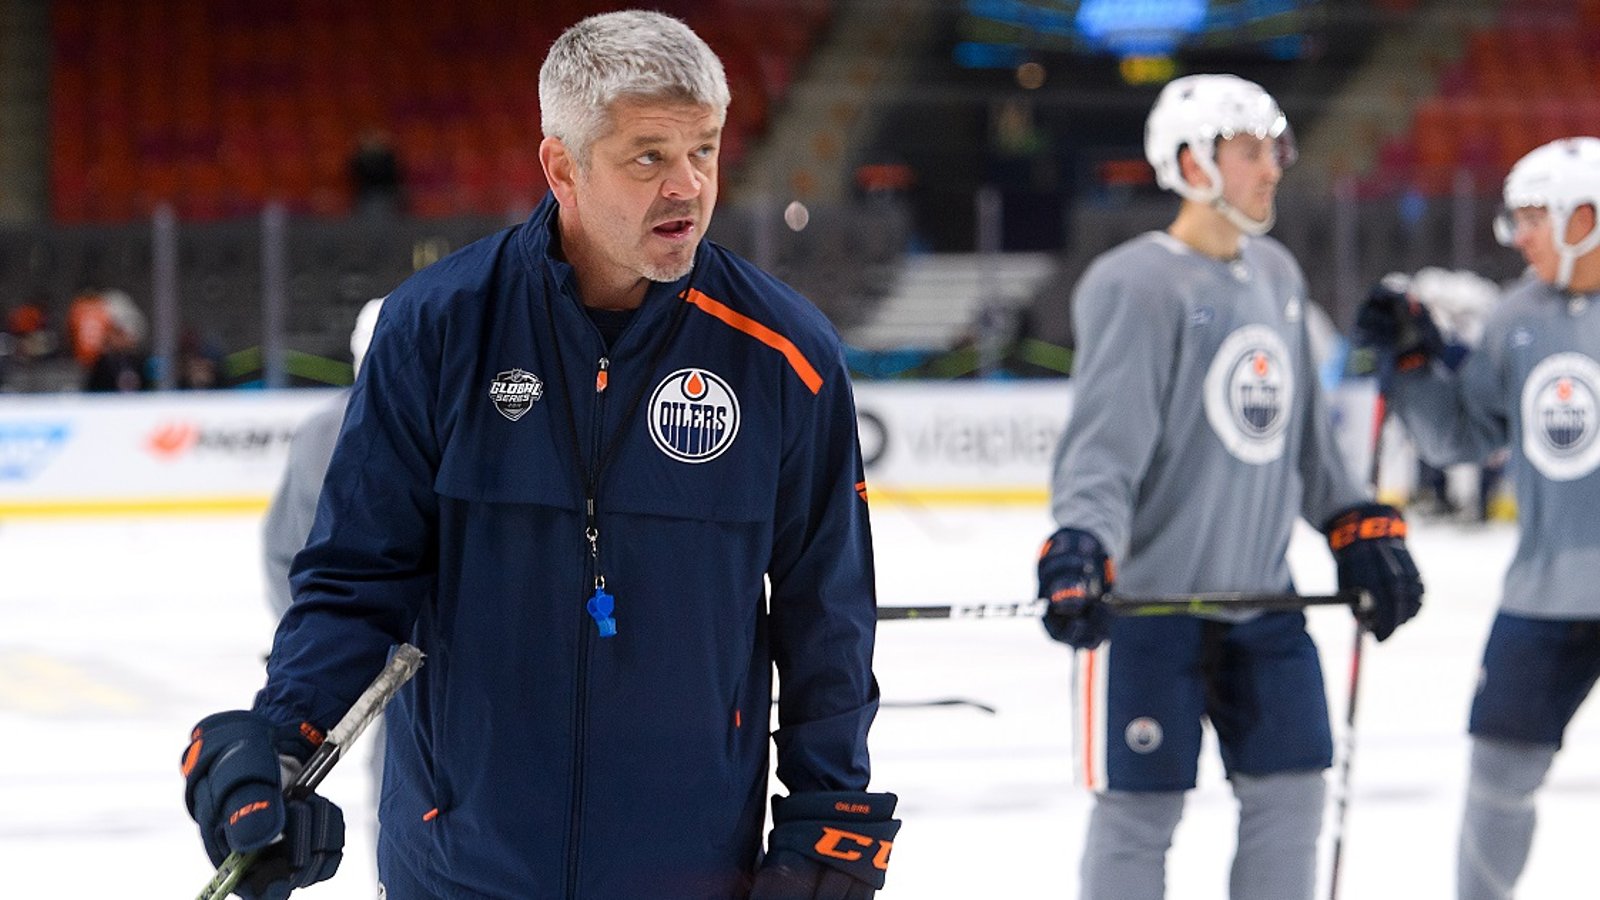 Two insiders linked former Oilers coach Todd McLellan to a new NHL team.